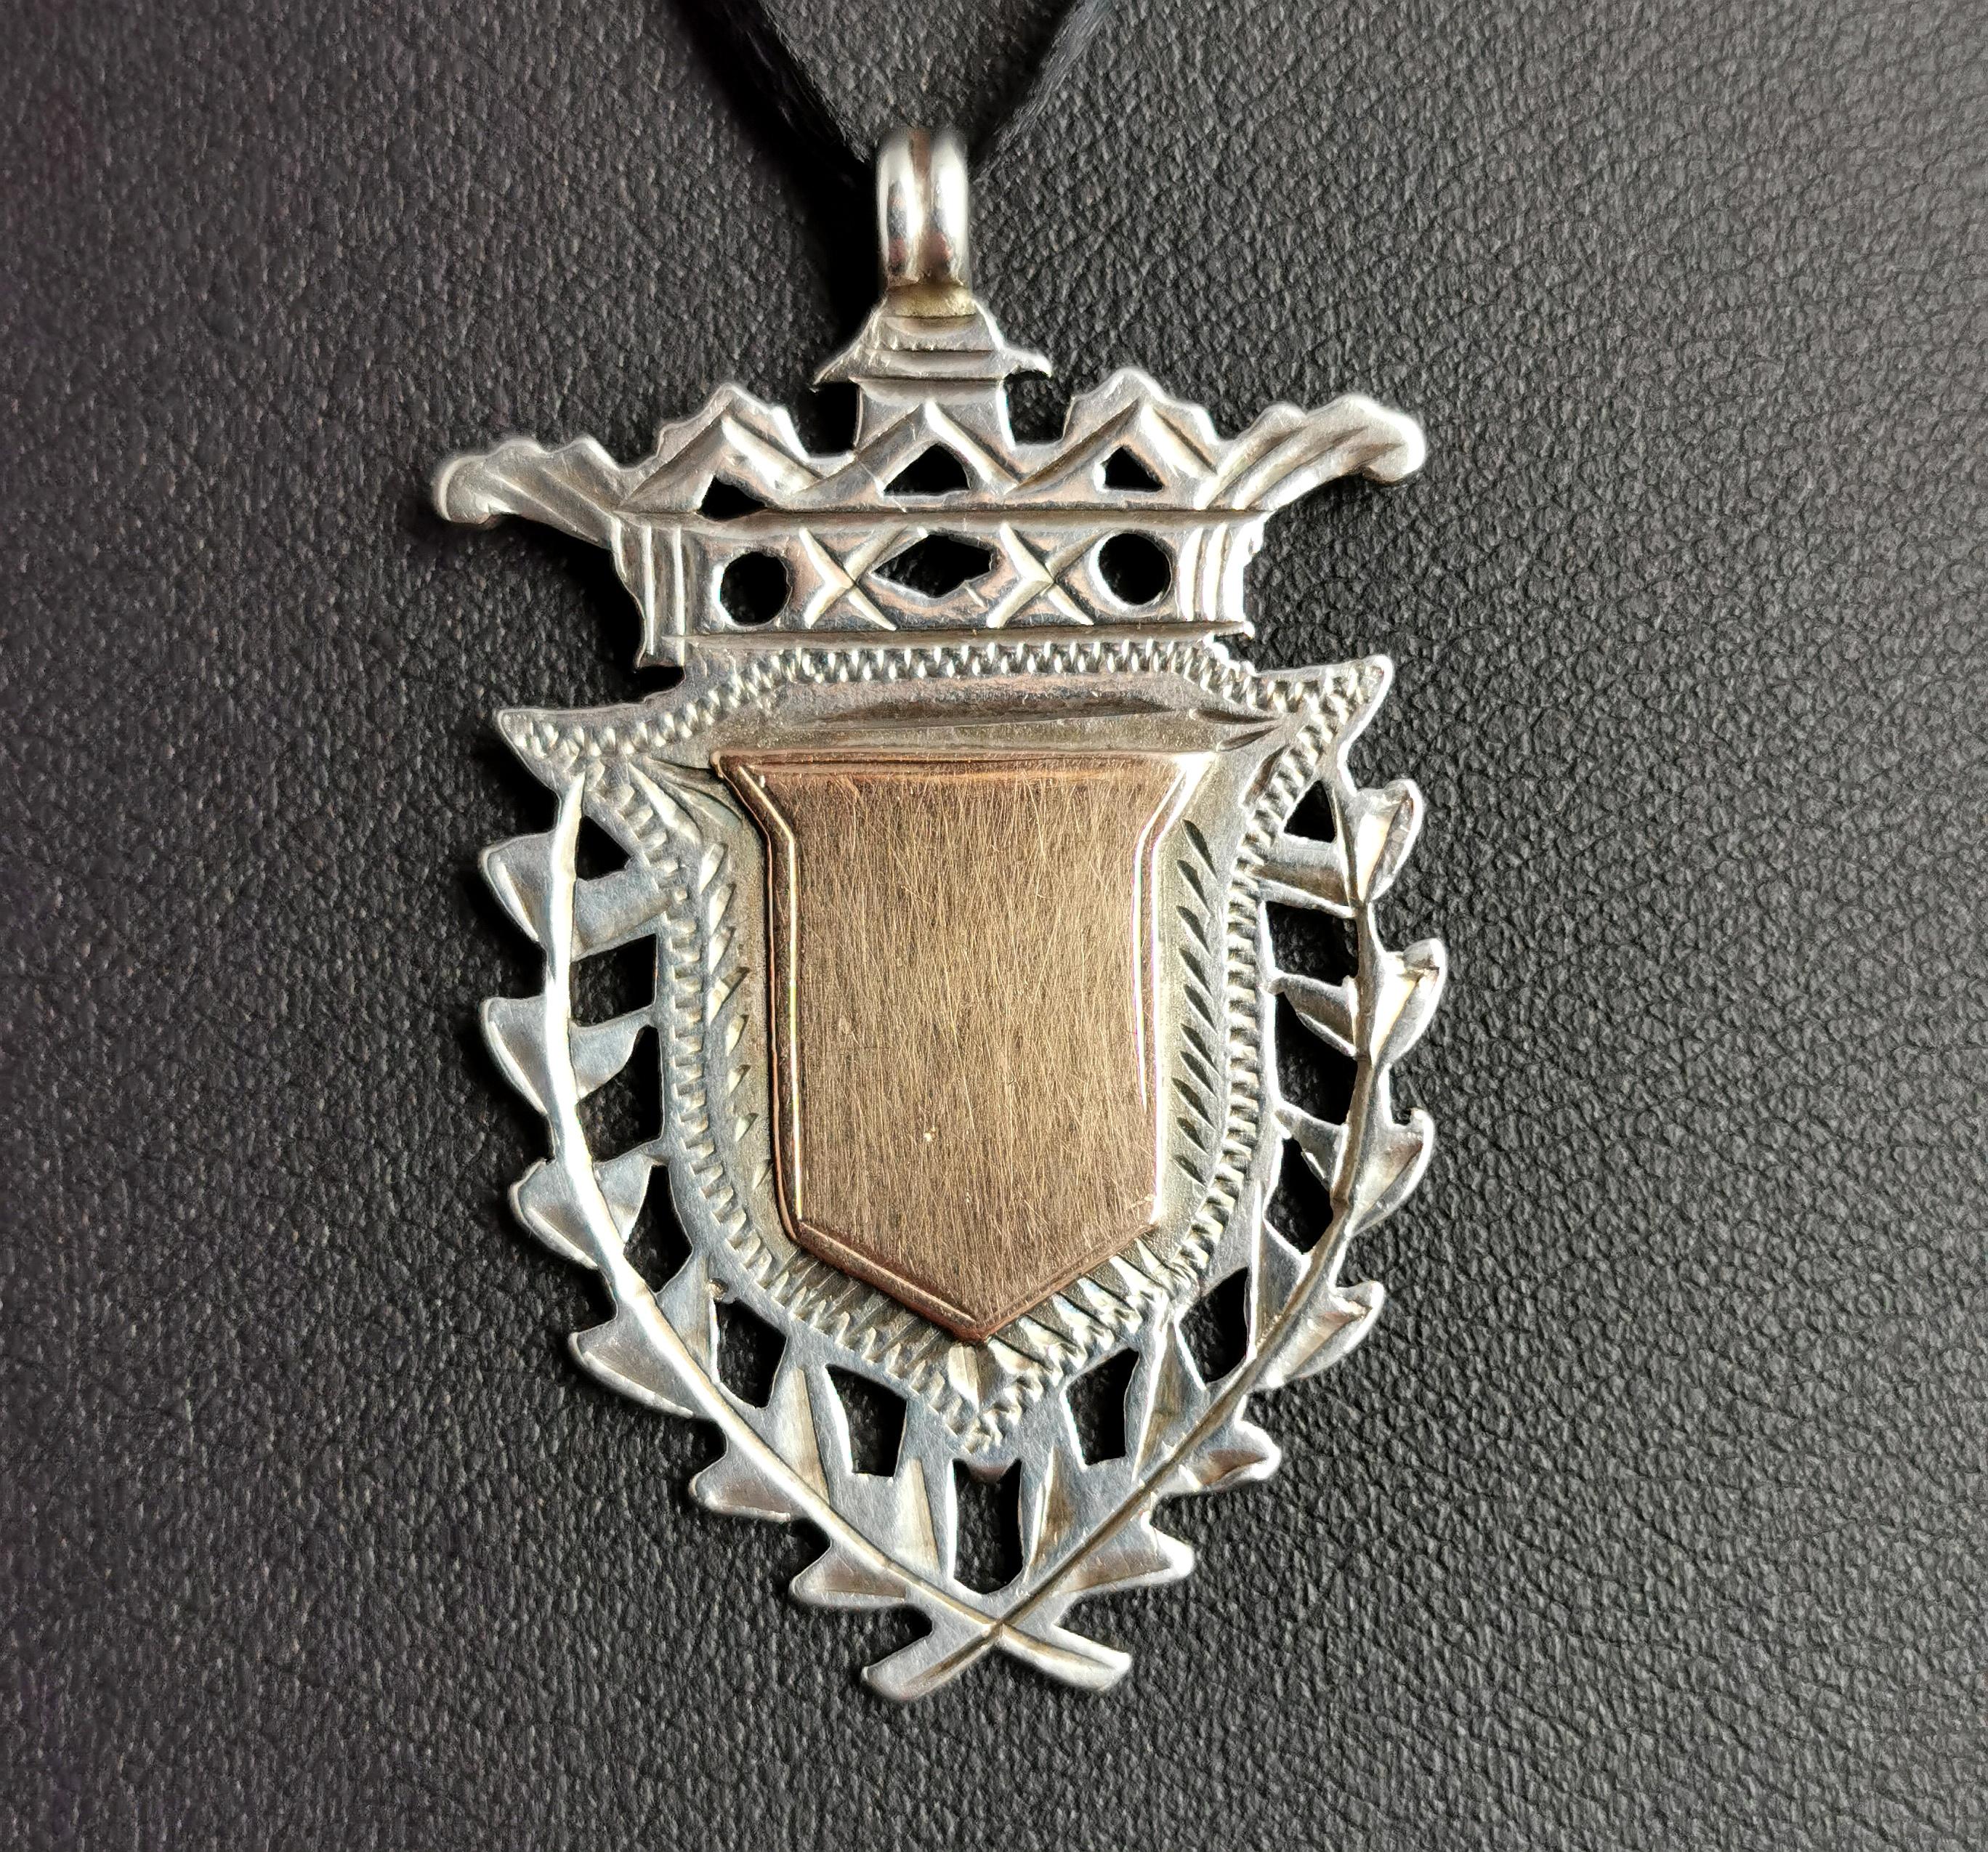 An attractive antique, Edwardian sterling silver and Rose gold shield fob.

A nice heavy fob with a decorative shield design and a 9ct Rose gold cartouche to the centre, this has not been monogrammed or engraved so could be personalised if